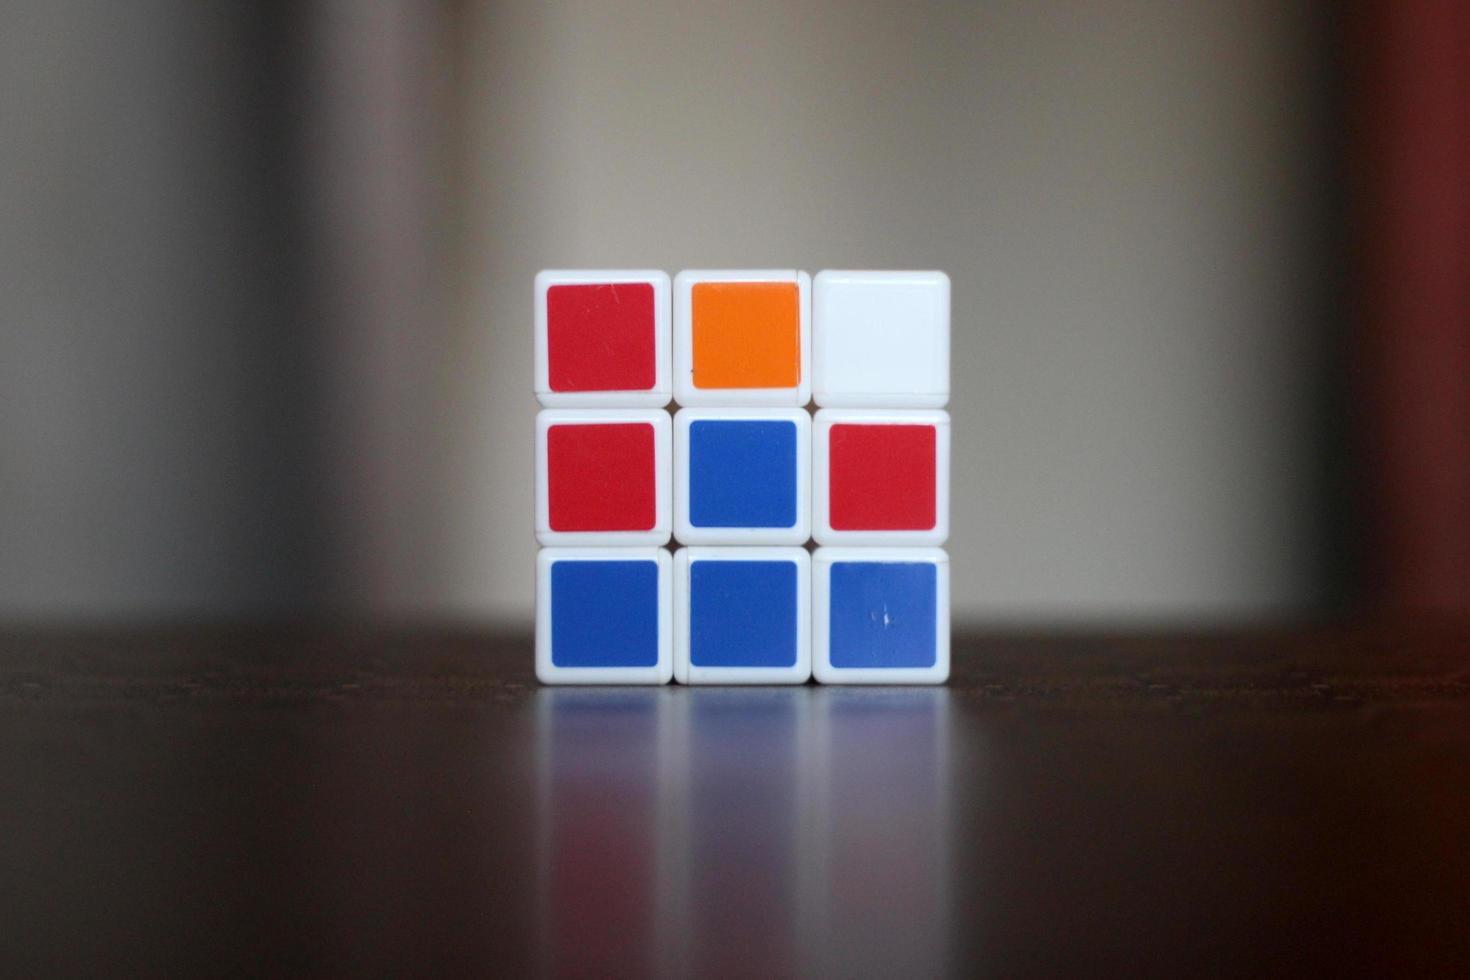 Rubik's cube on the black background. Rubik's Cube was invented by Hungarian architect Erno Rubik in 1974. photo